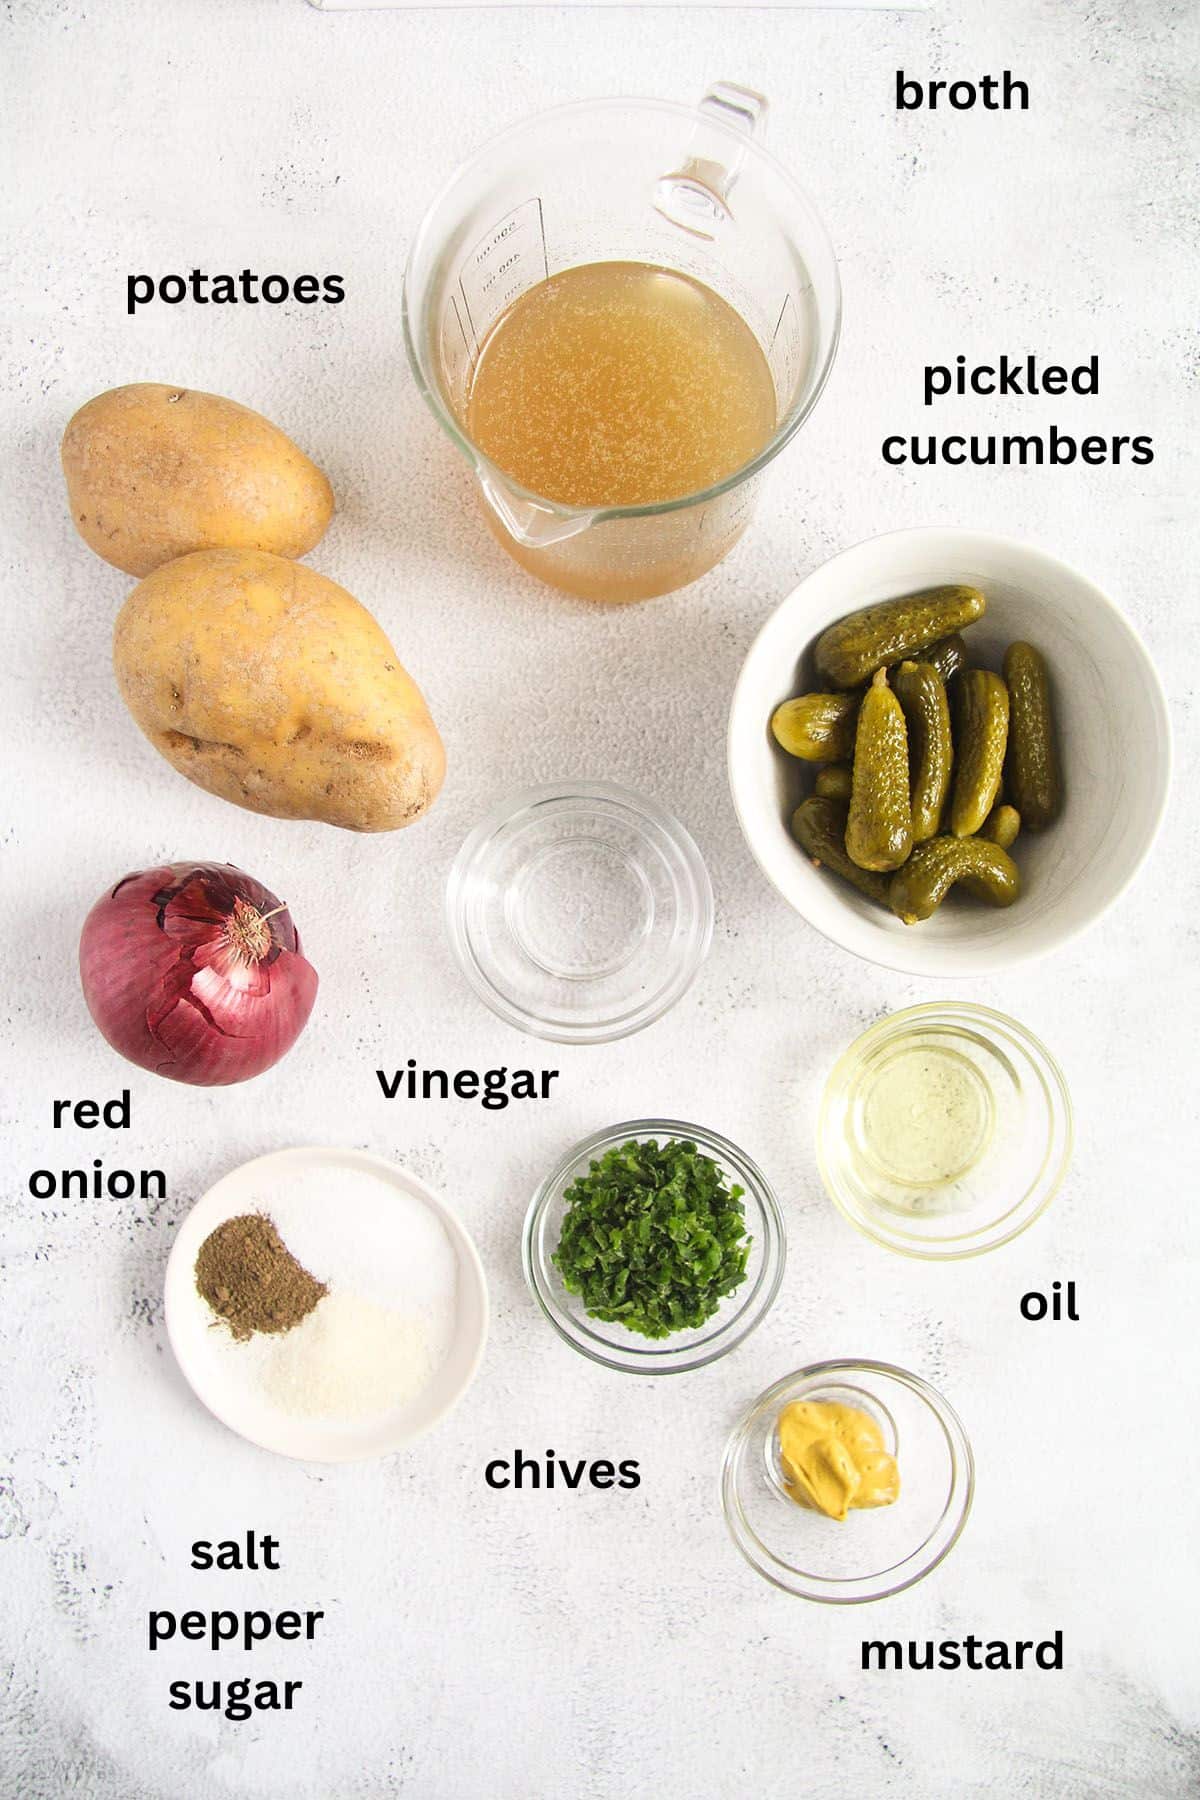 listed ingredients for making german potato salad with oil, vinegar and onions.